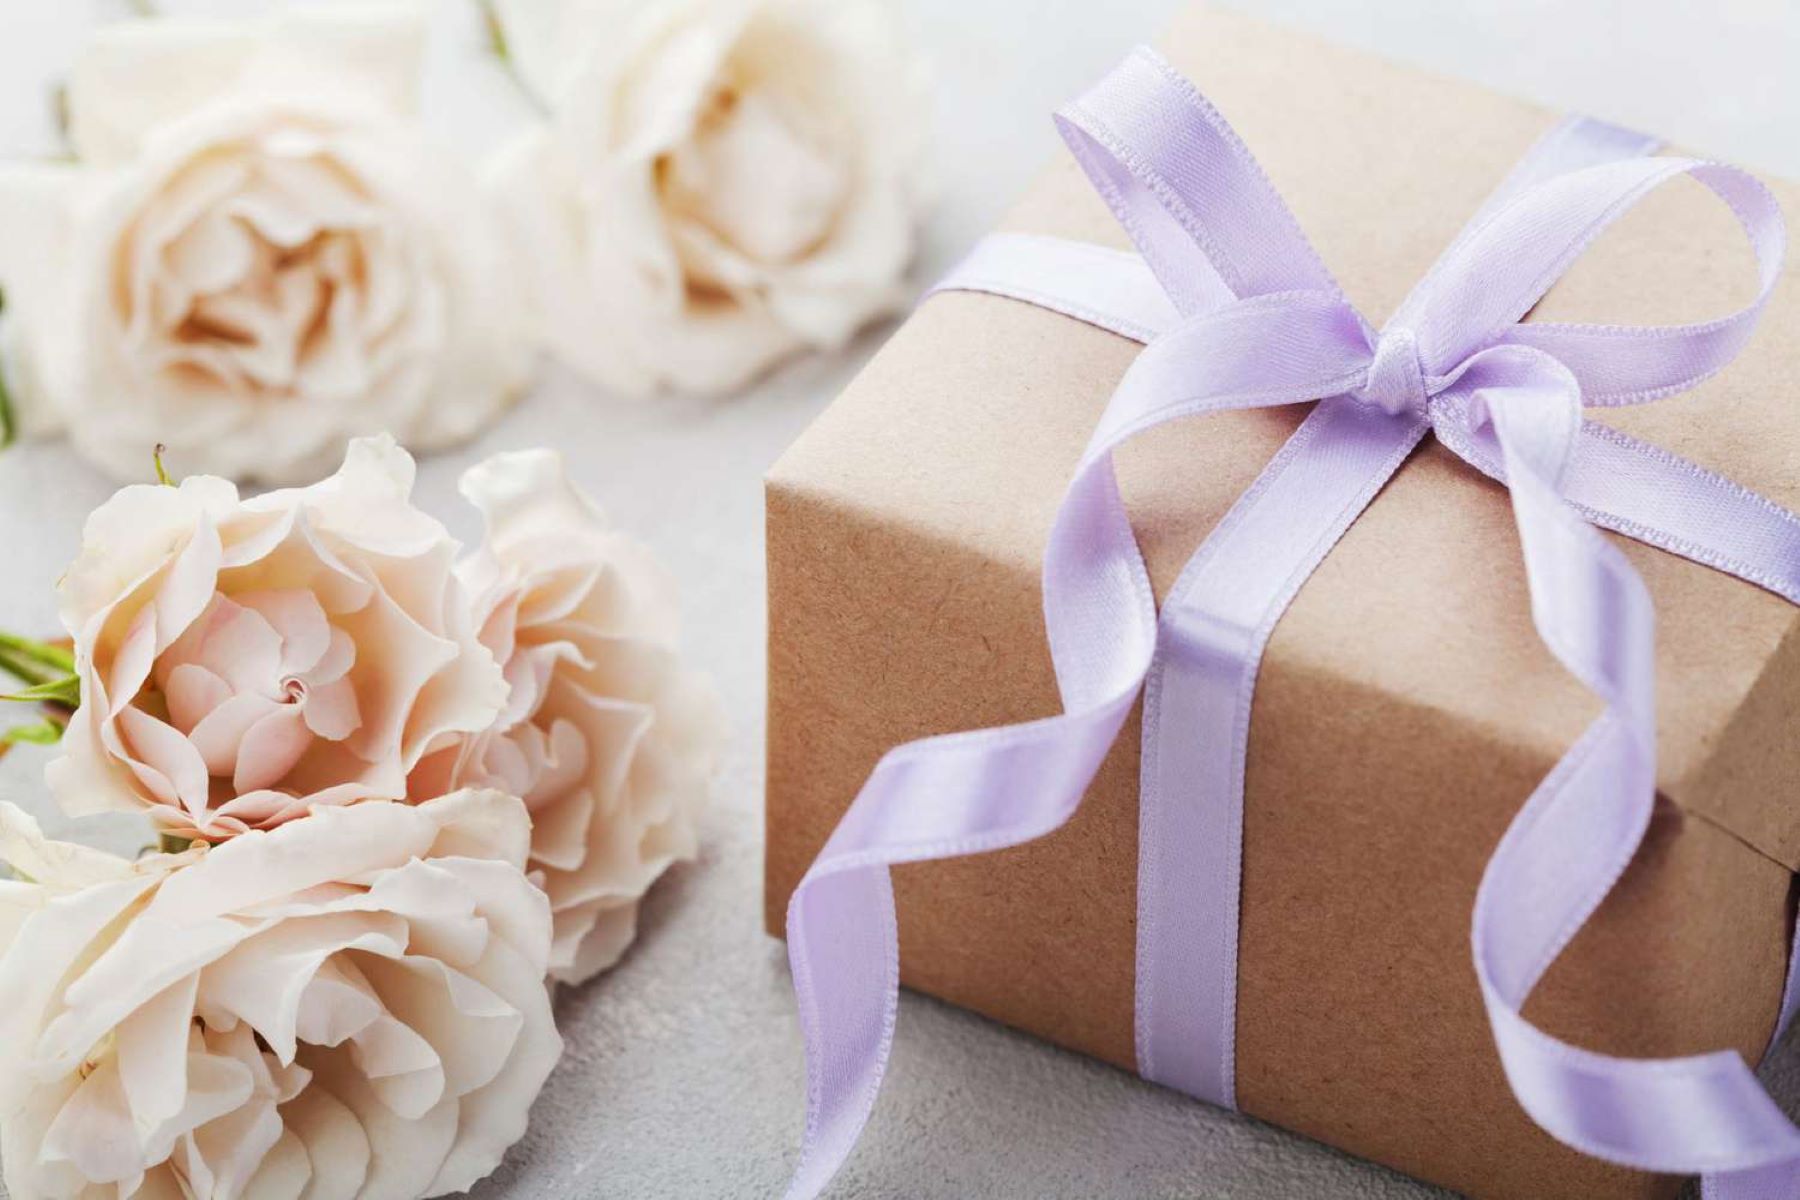 The Ultimate Guide To Wedding Gift Etiquette: Should You Give Gifts To Both The Bride And Groom?